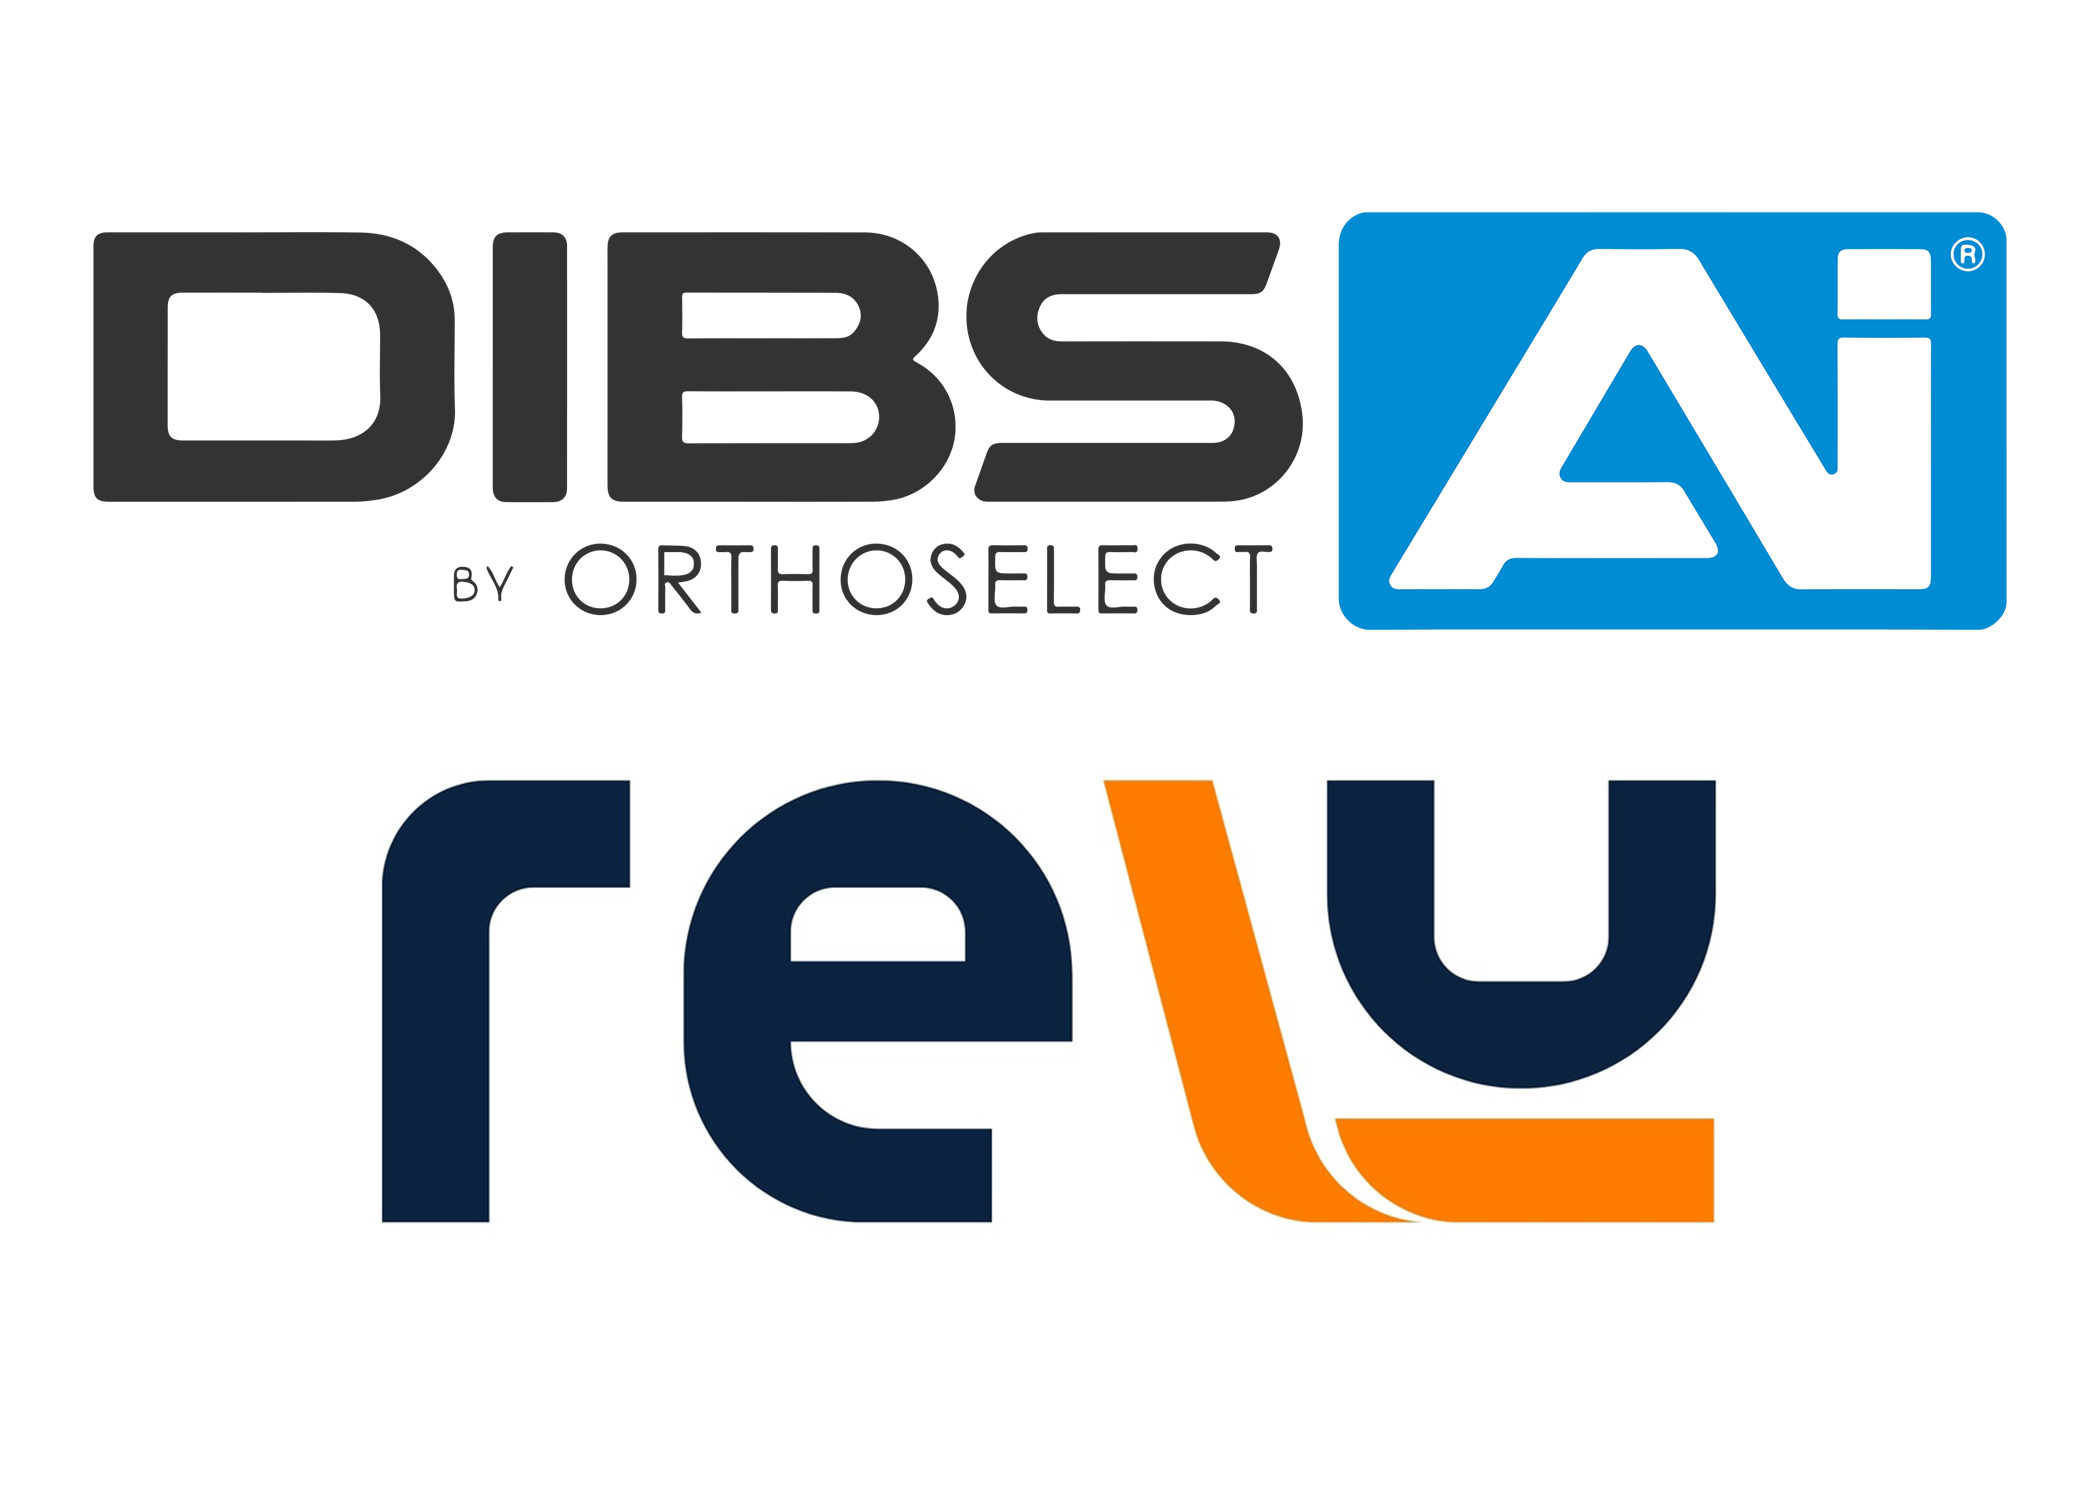 OrthoSelect Partners with Relu for Software Integration. Image credit: © OrthoSelect © Relu